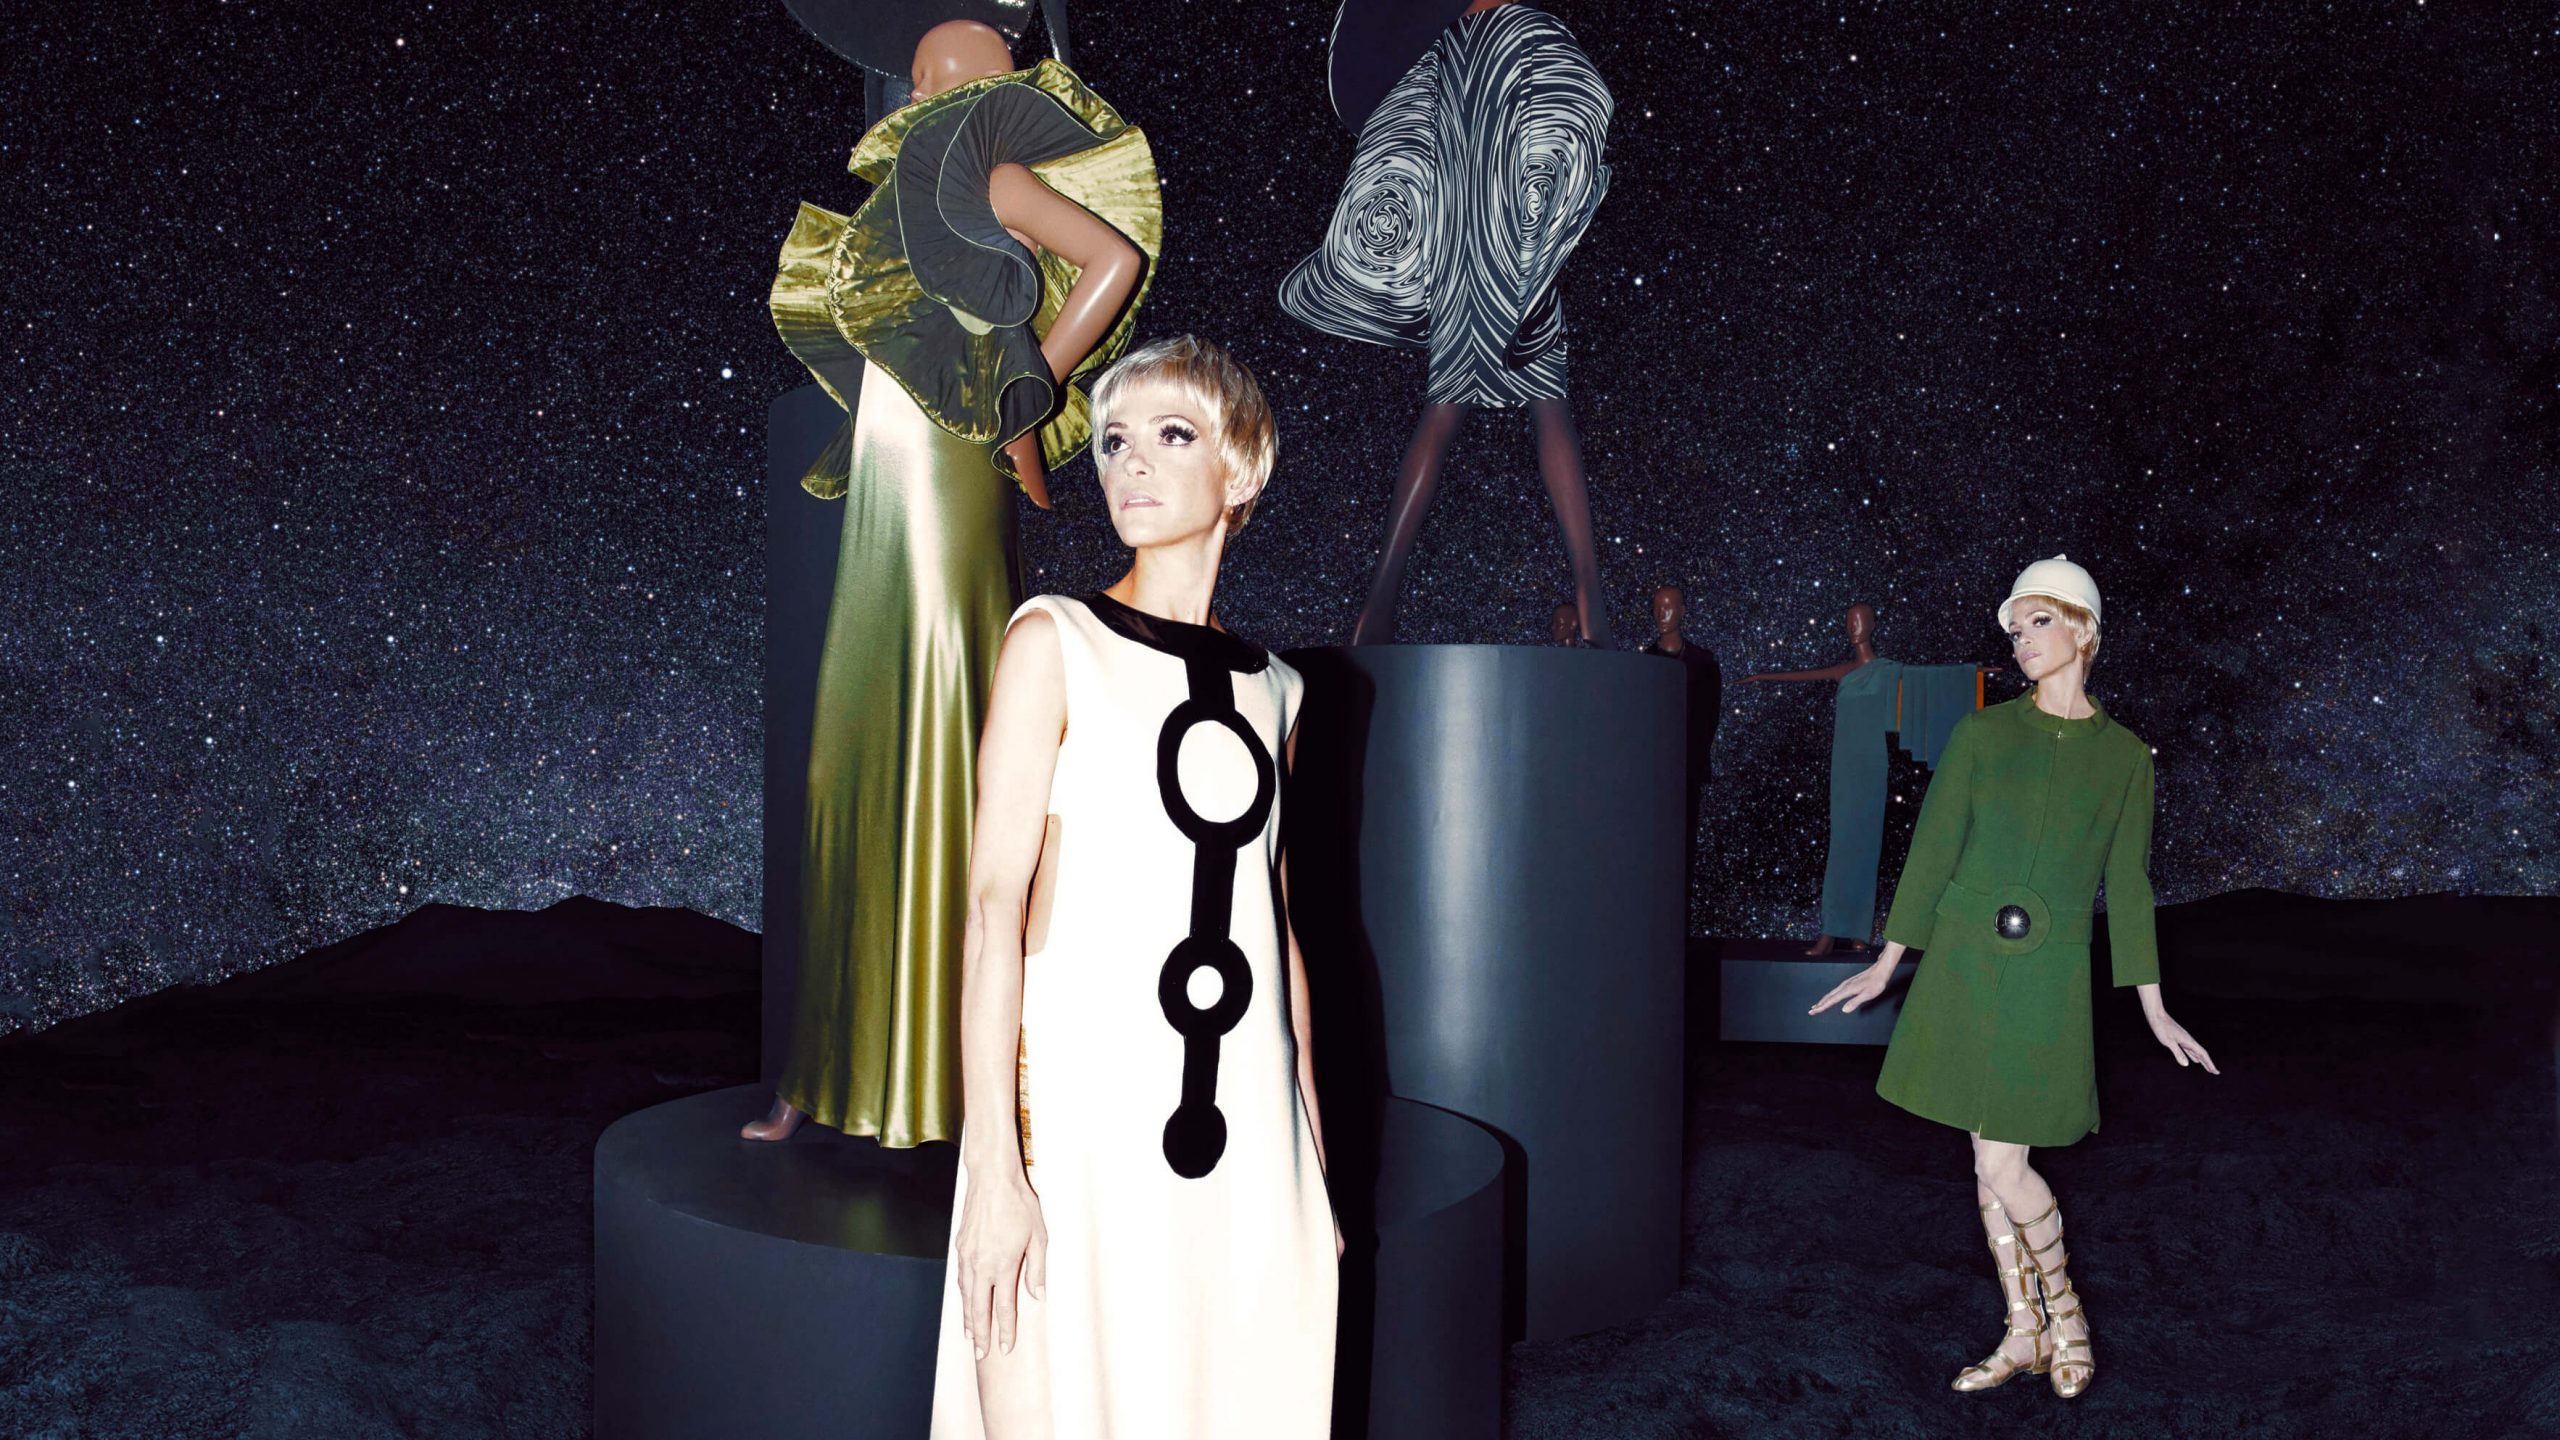 Why Does High Fashion Go Over The Moon For The Stars? – Ungravity